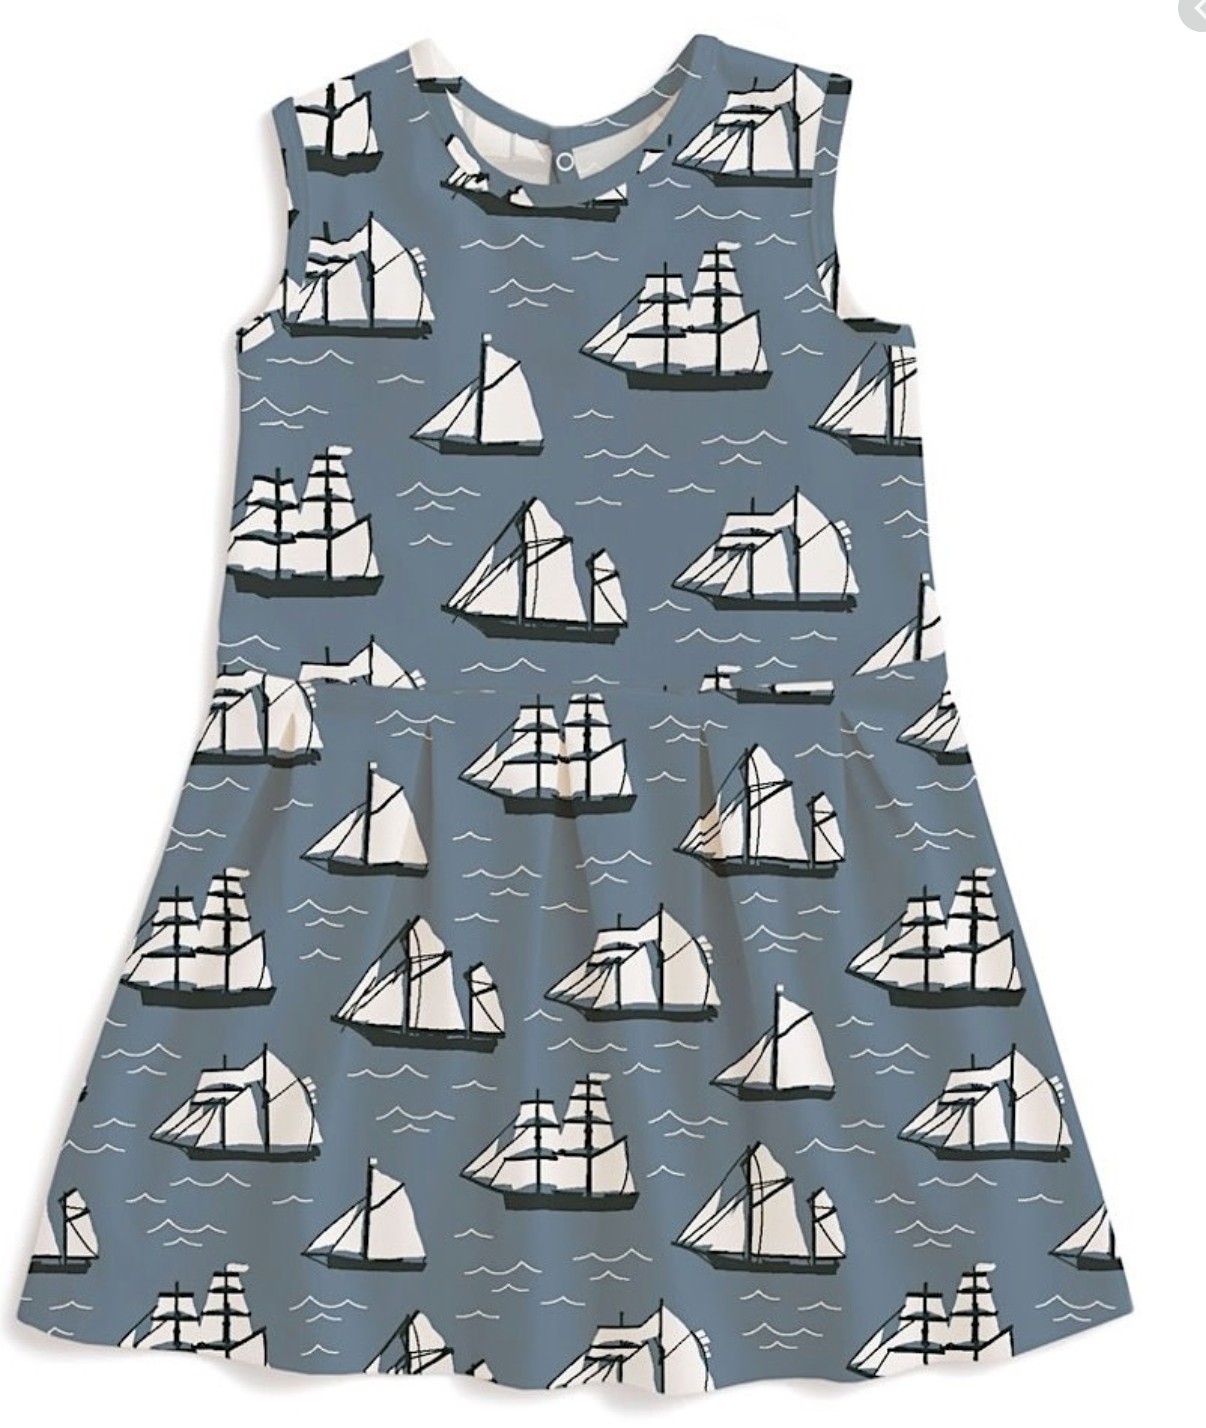 Winter Water Factory Essex Dress in Vintage Sailboats